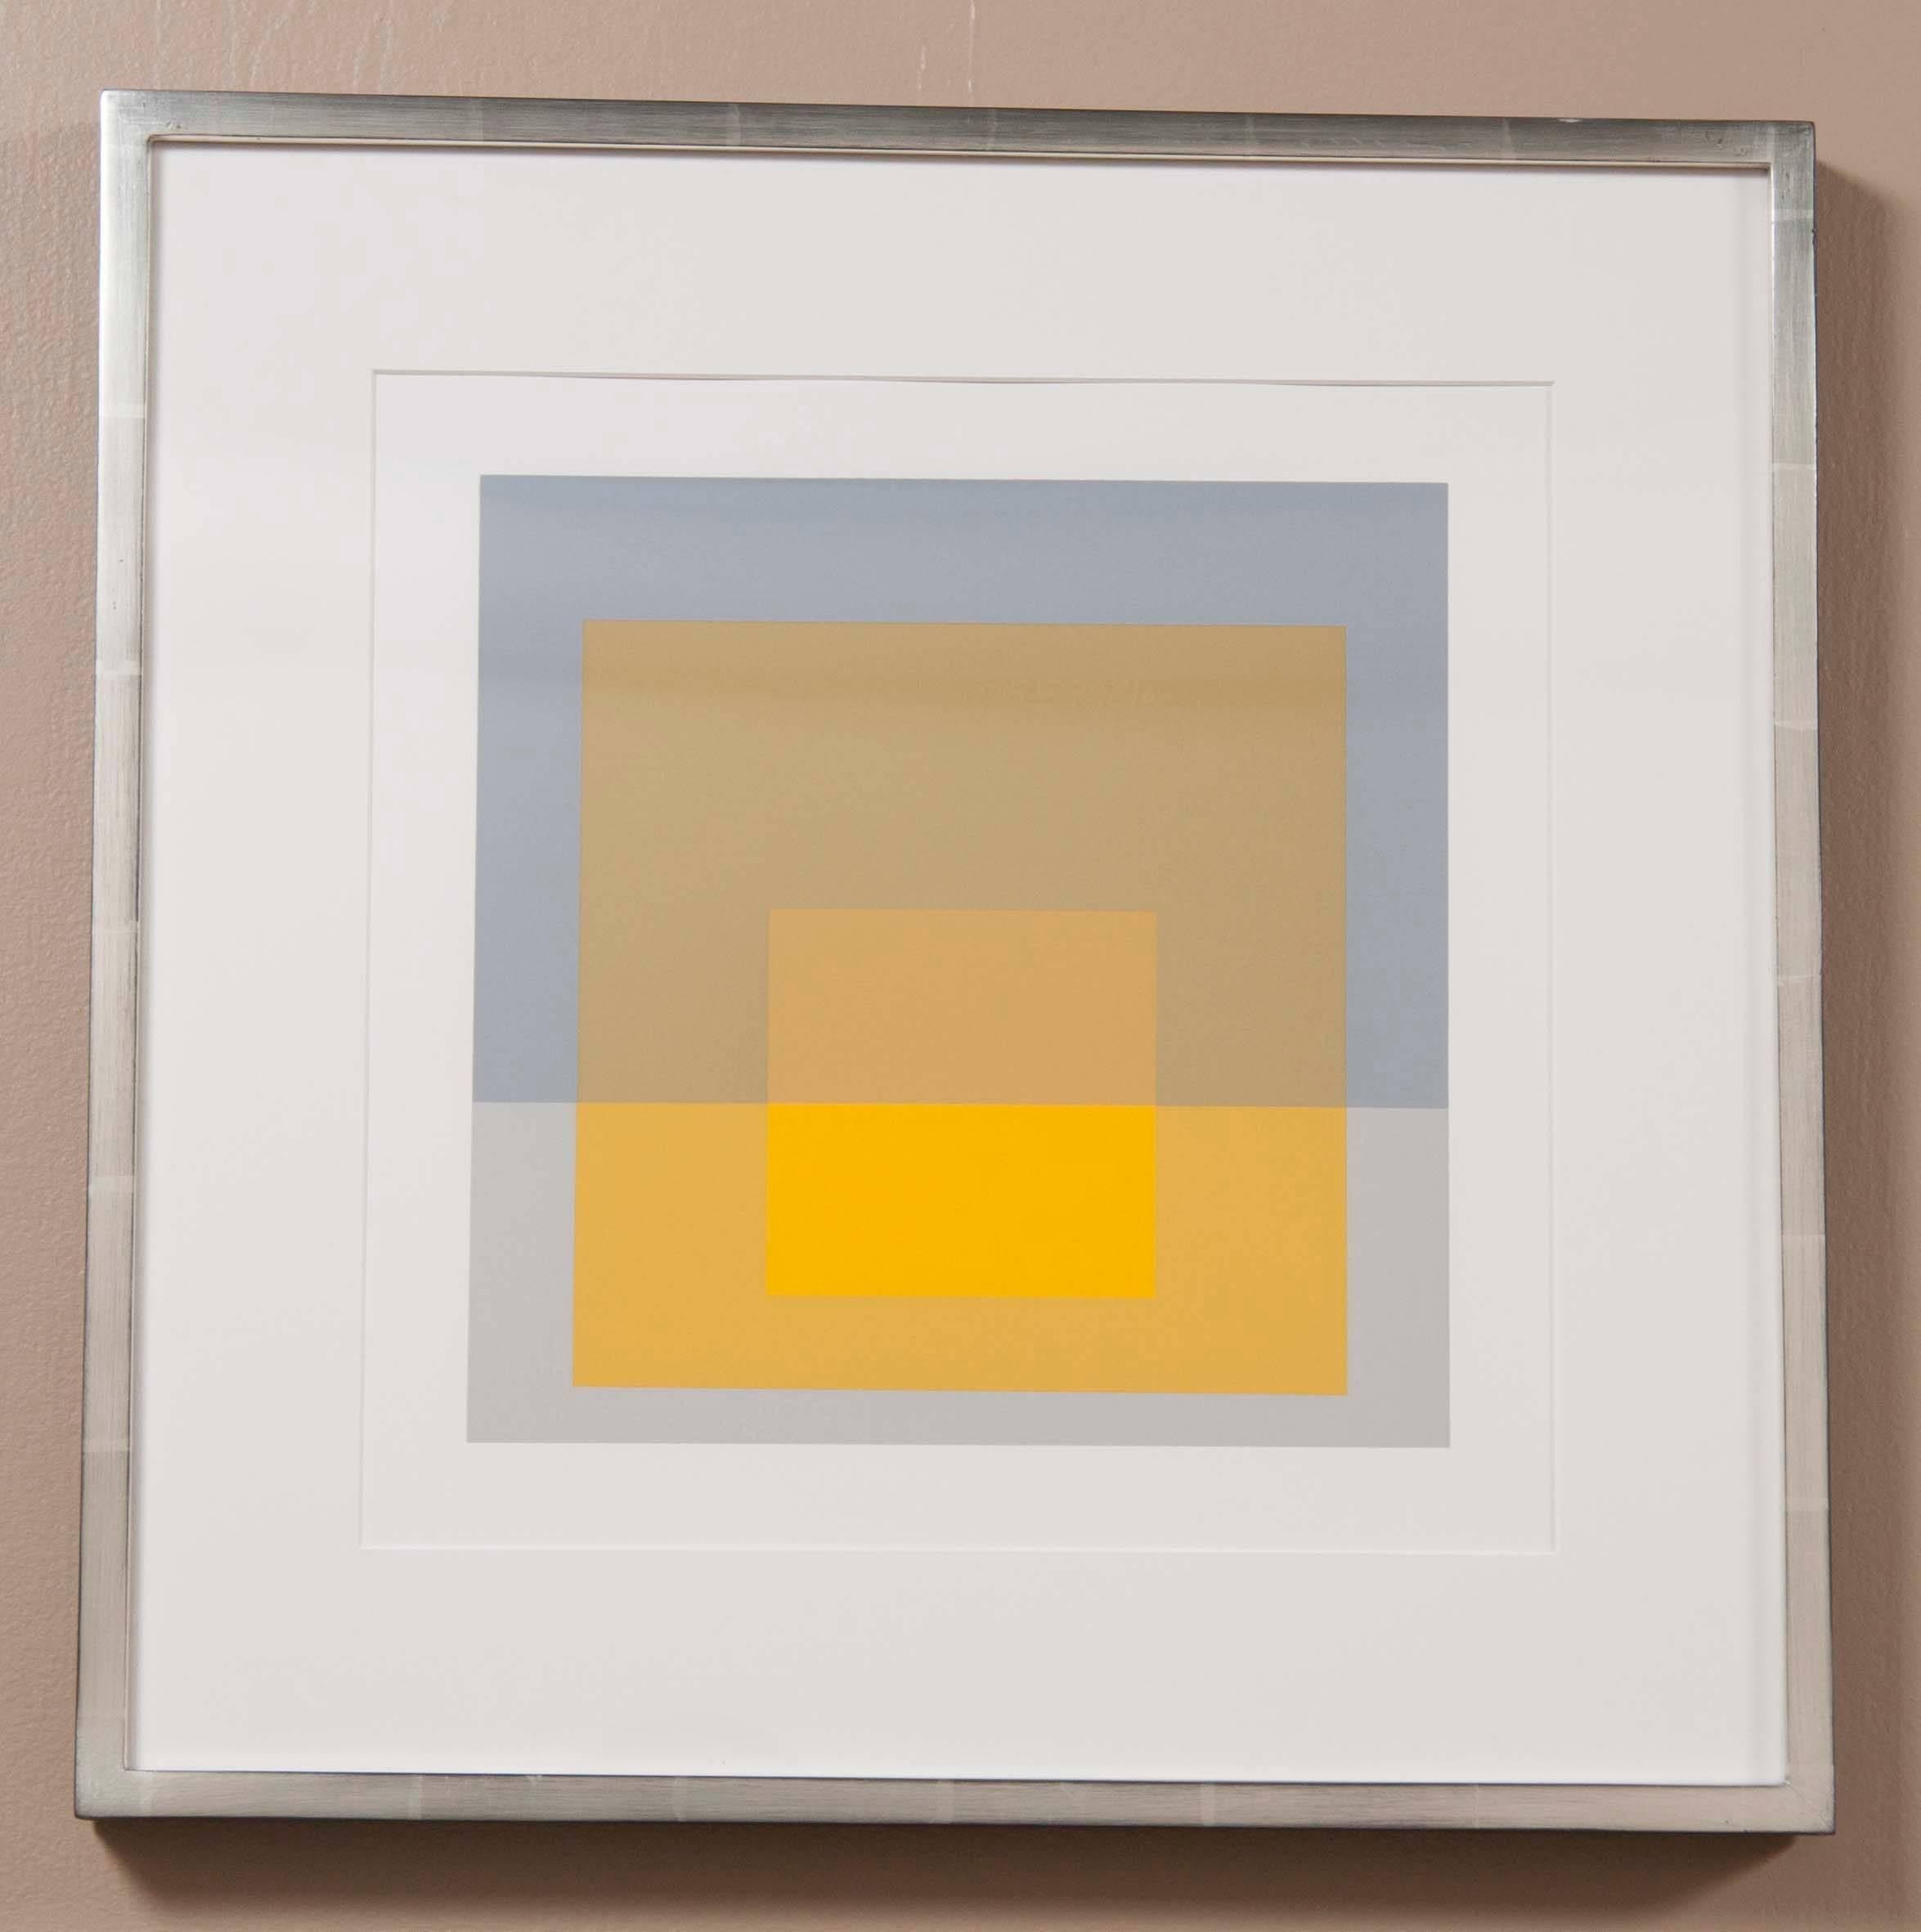 Josef Albers homage to the square from Formations: Articulation 1972. Silkscreen prints matted in 12-karat white gold frame using all acid free archival materials. #176 of 1000 printed.
Printed by Sirocco screen printing, New Haven.
Published by